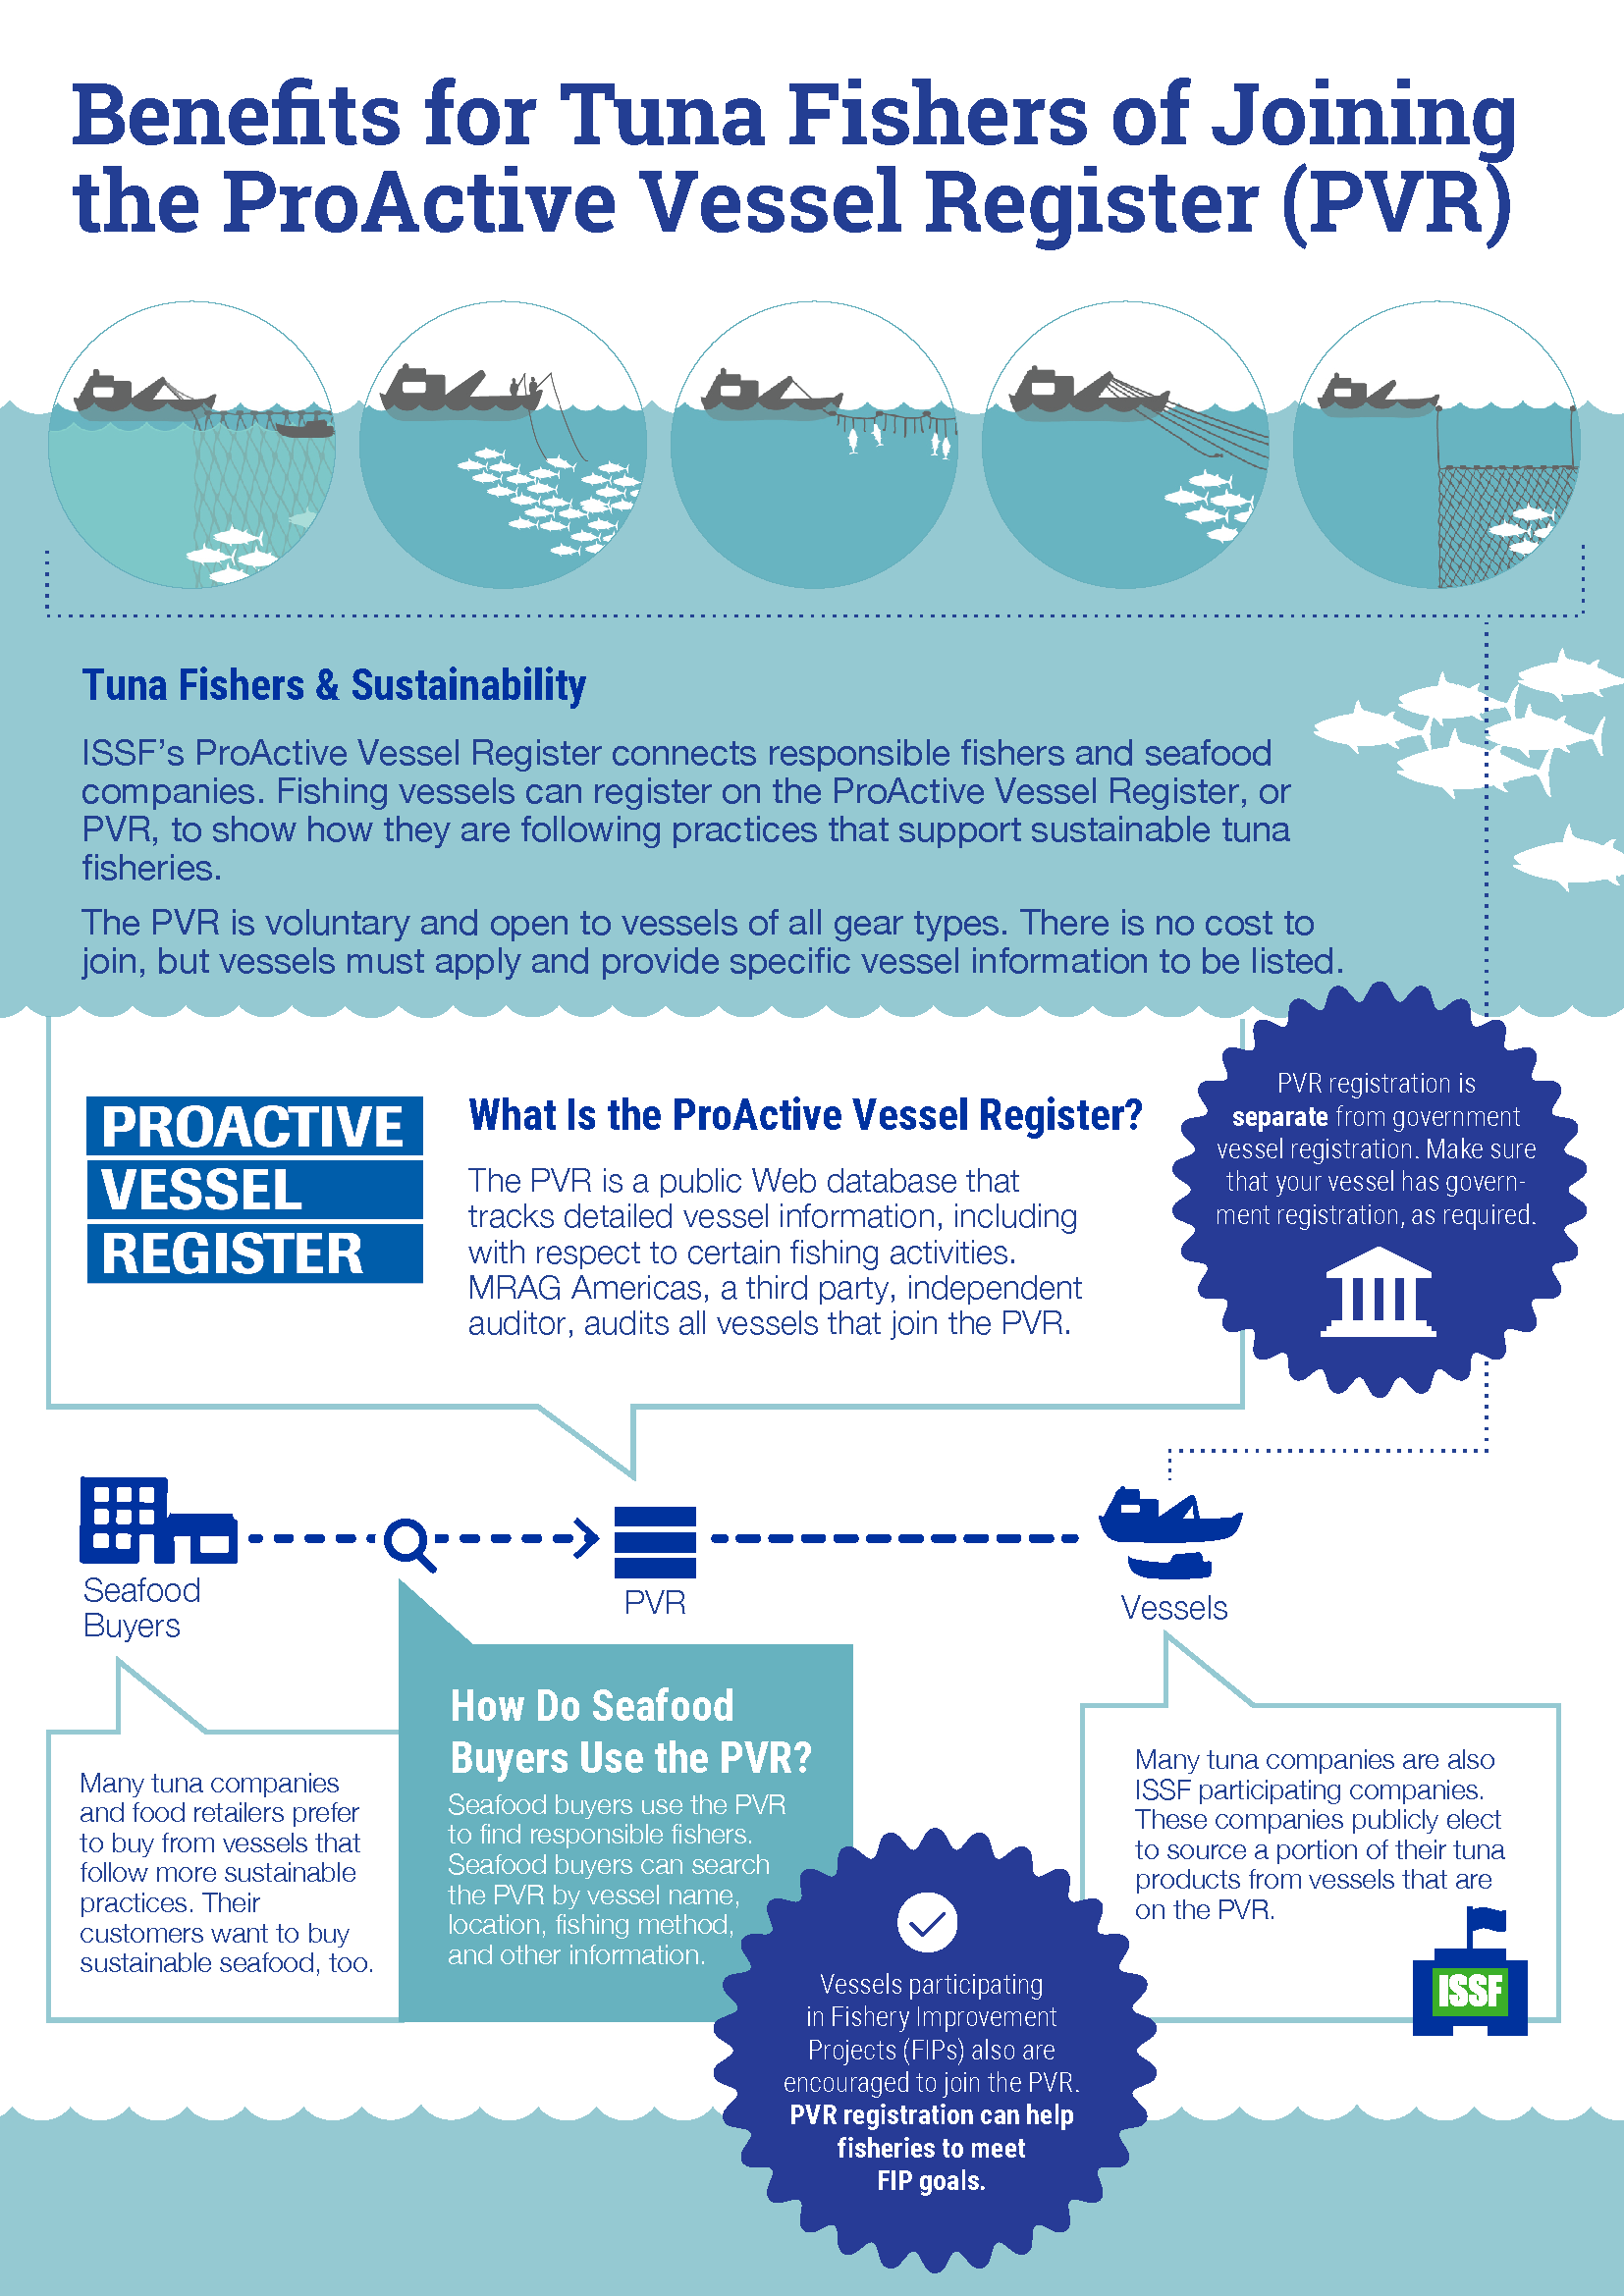 sustainable seafood infographic